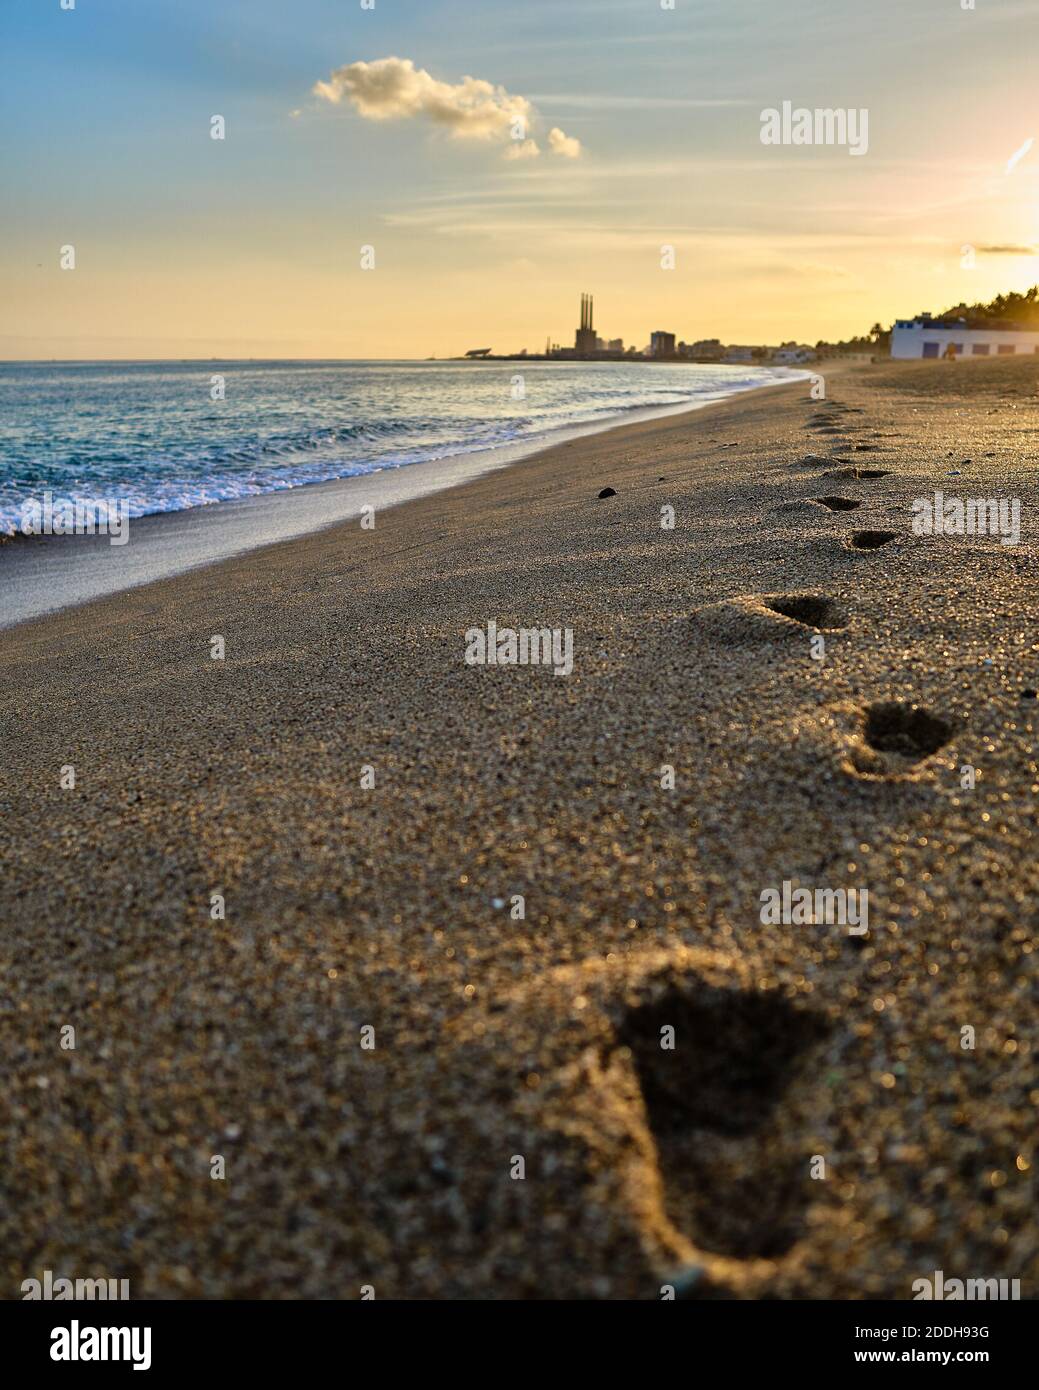 Focus on the 2nd footstep on the beach at sunset time in Badalona Spain with a fade of the landscape on the background Stock Photo